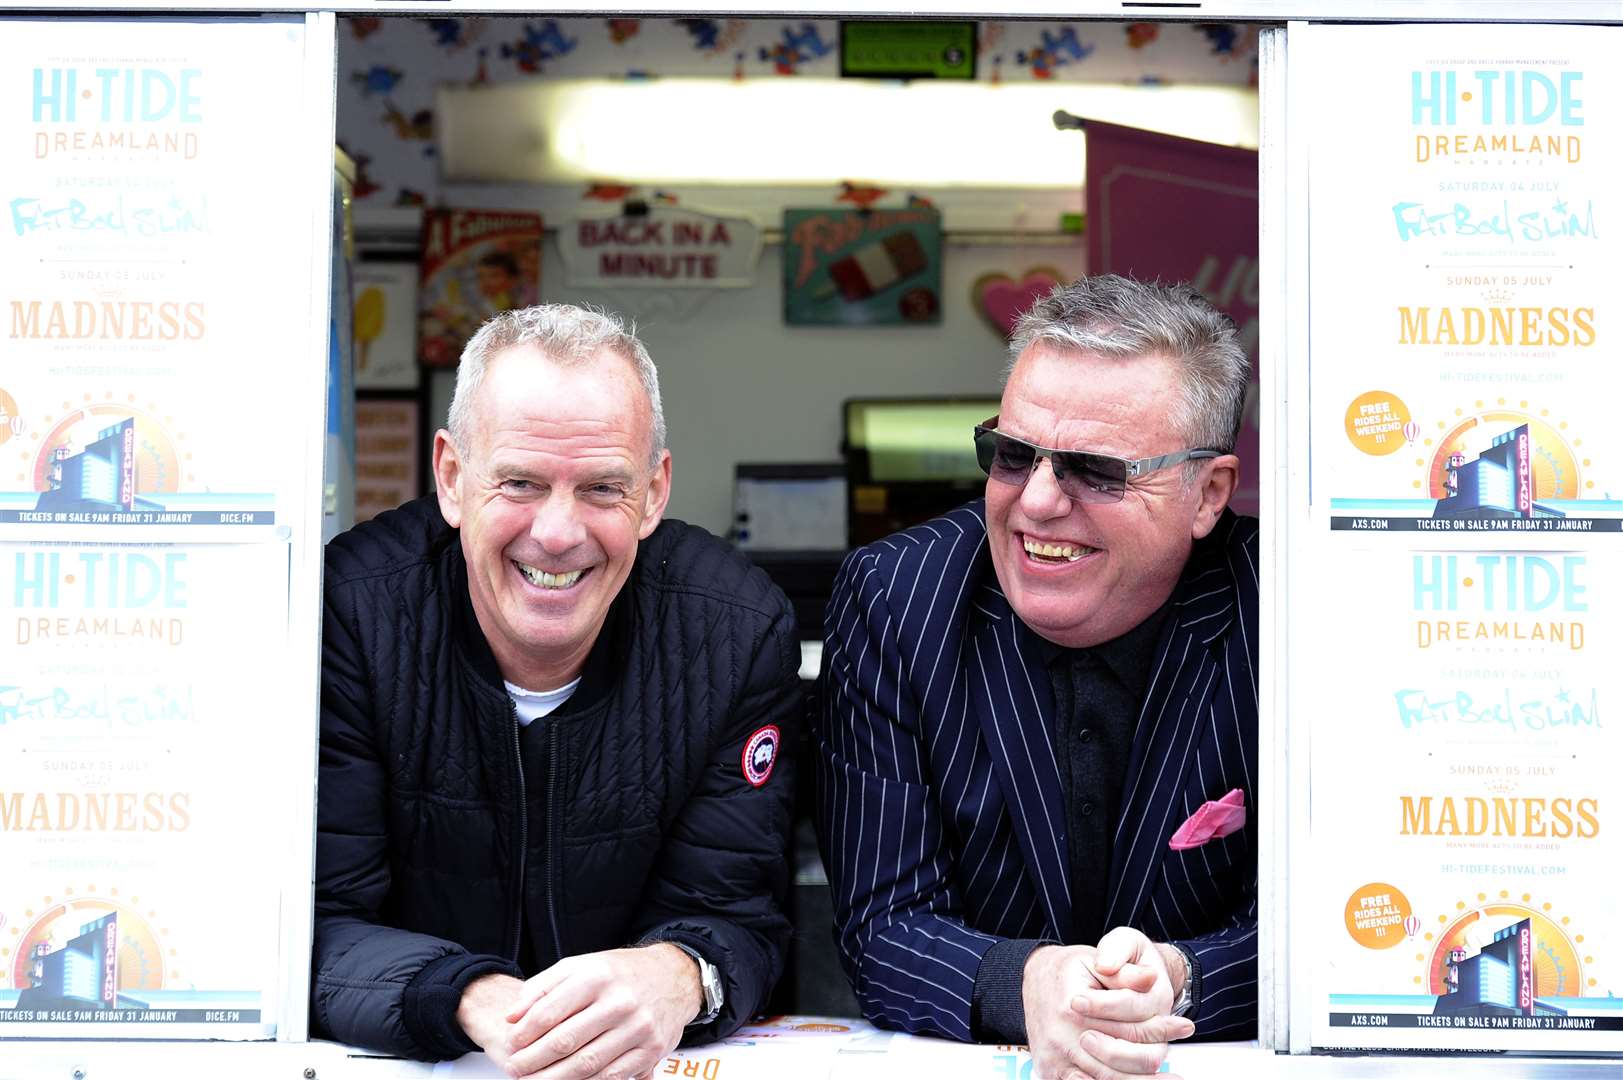 Fatboy Slim and Suggs and gave away 100 free tickets from an ice cream van earlier this month